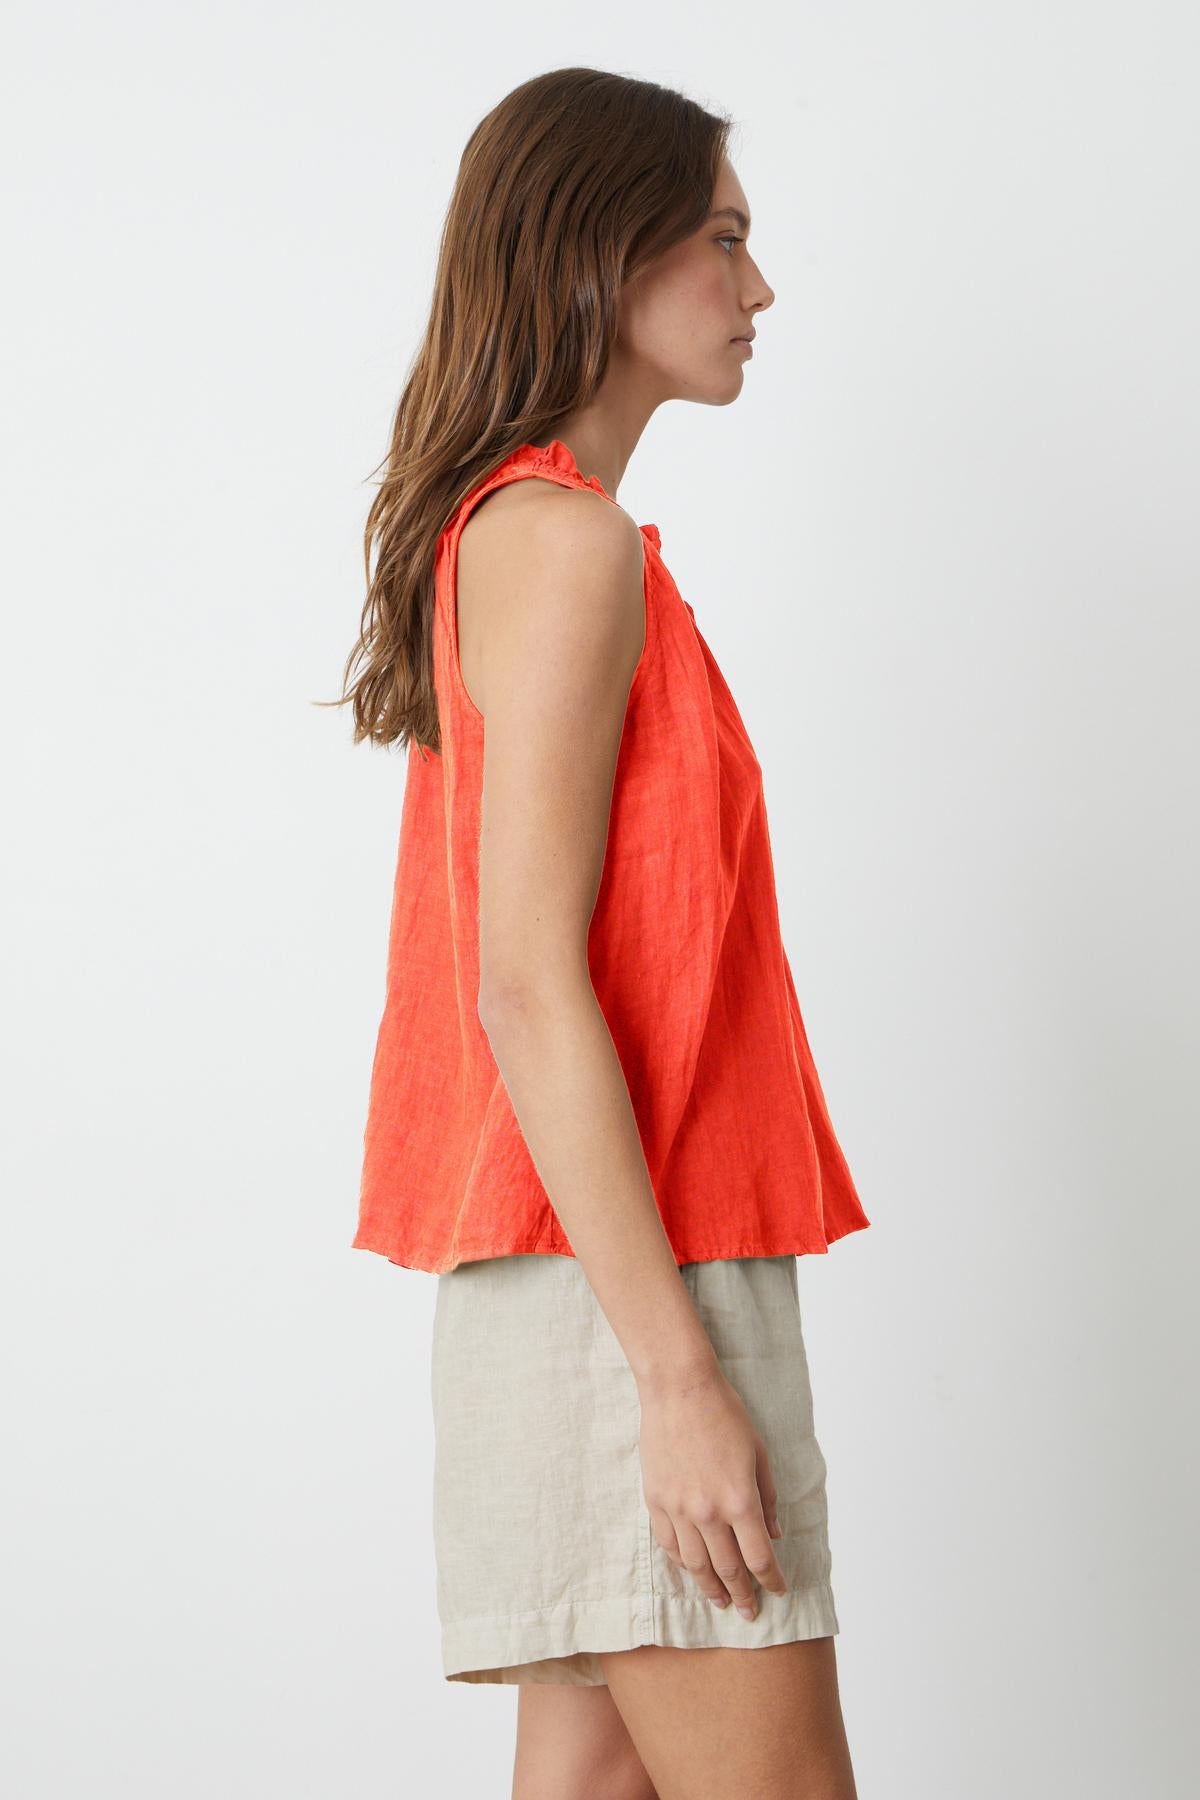   The back view of a woman wearing a ZOEY LINEN V-NECK TANK TOP by Velvet by Graham & Spencer and tan shorts. 